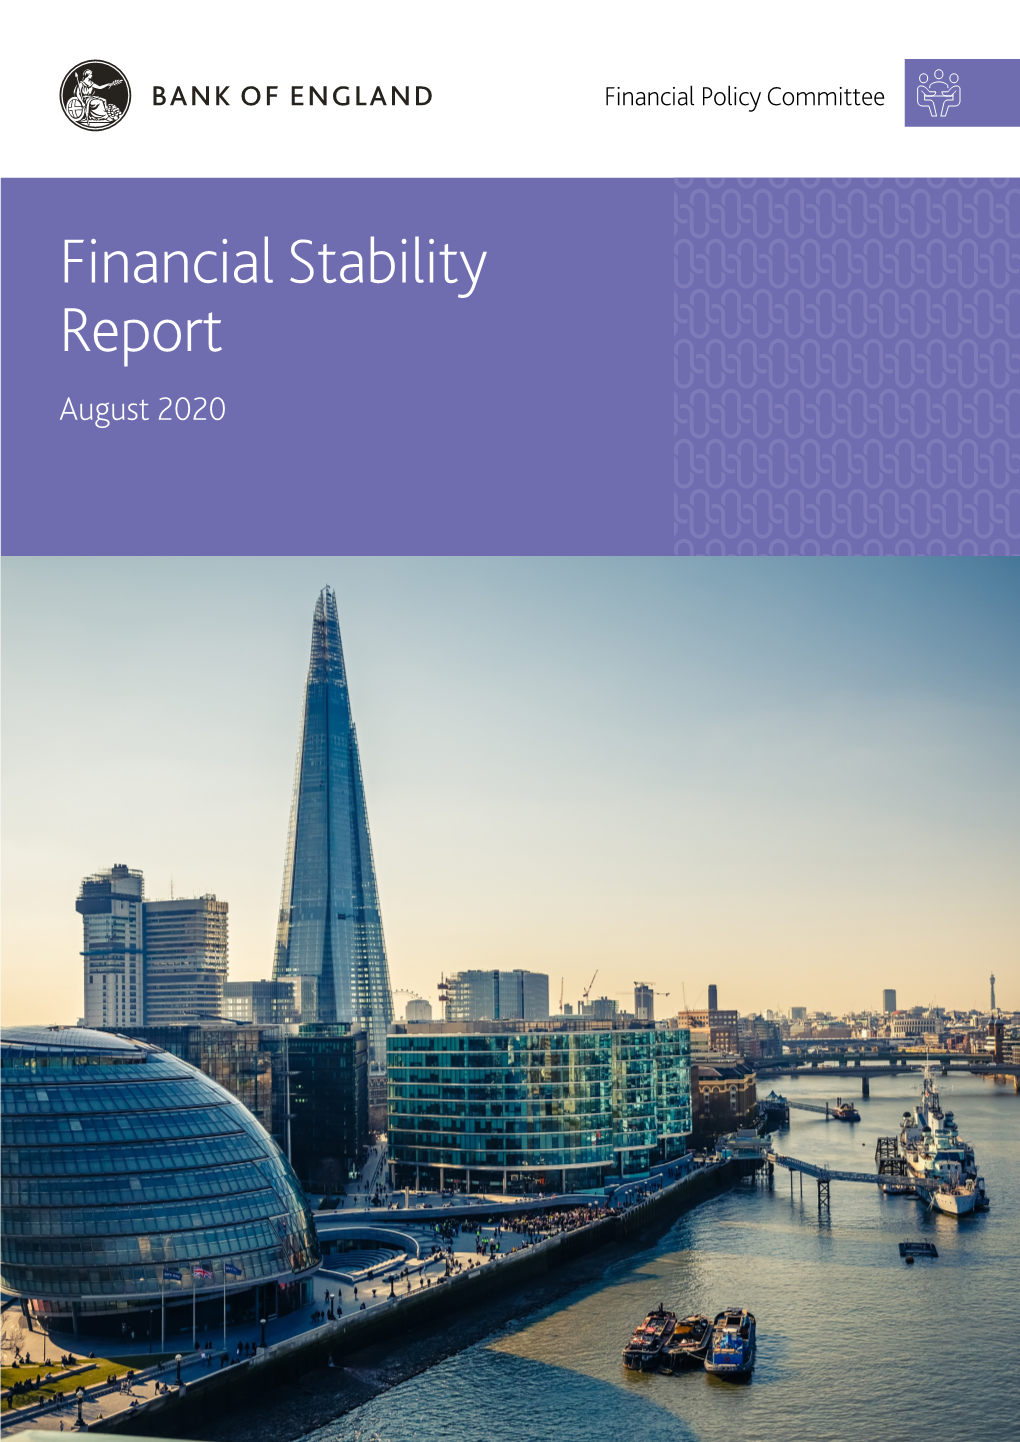 Financial Stability Report August 2020